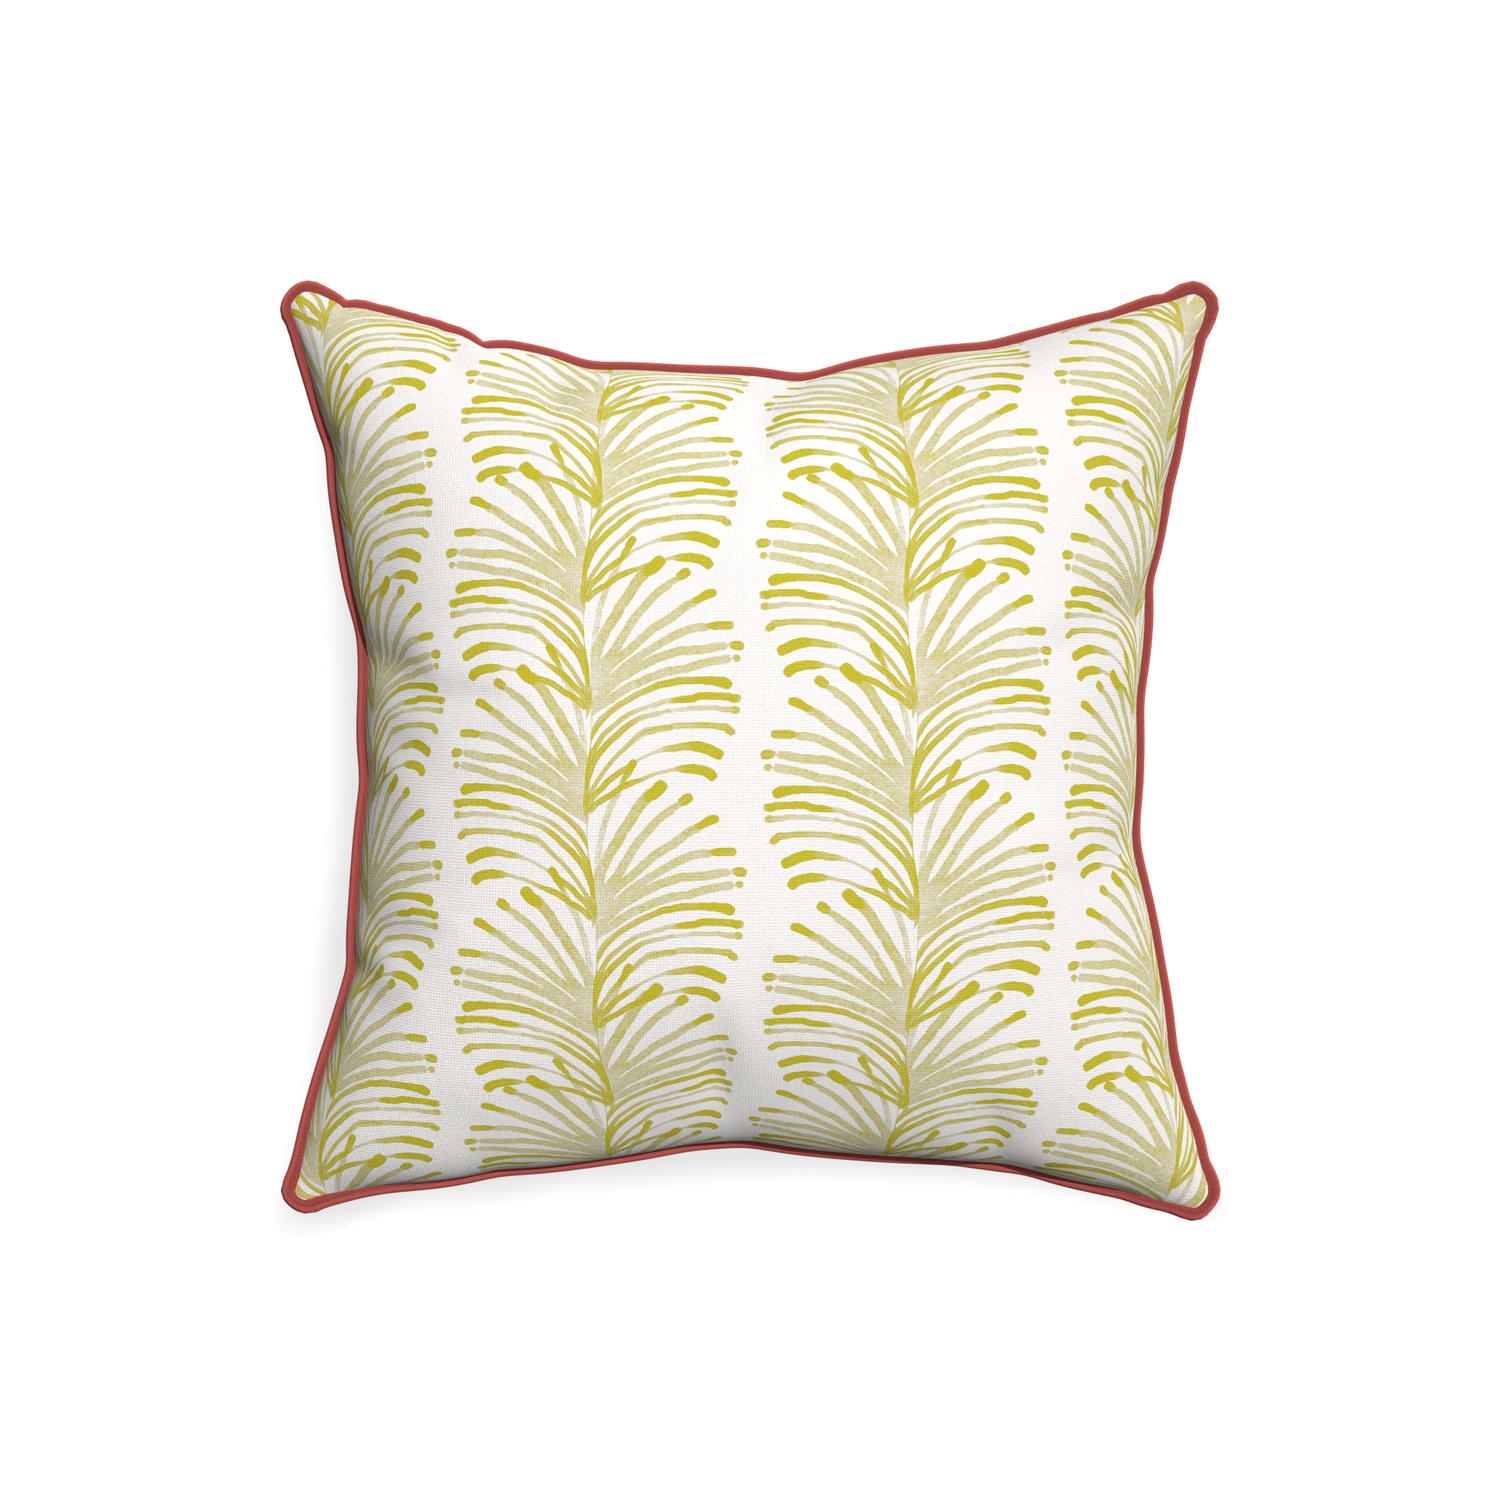 20-square emma chartreuse custom pillow with c piping on white background